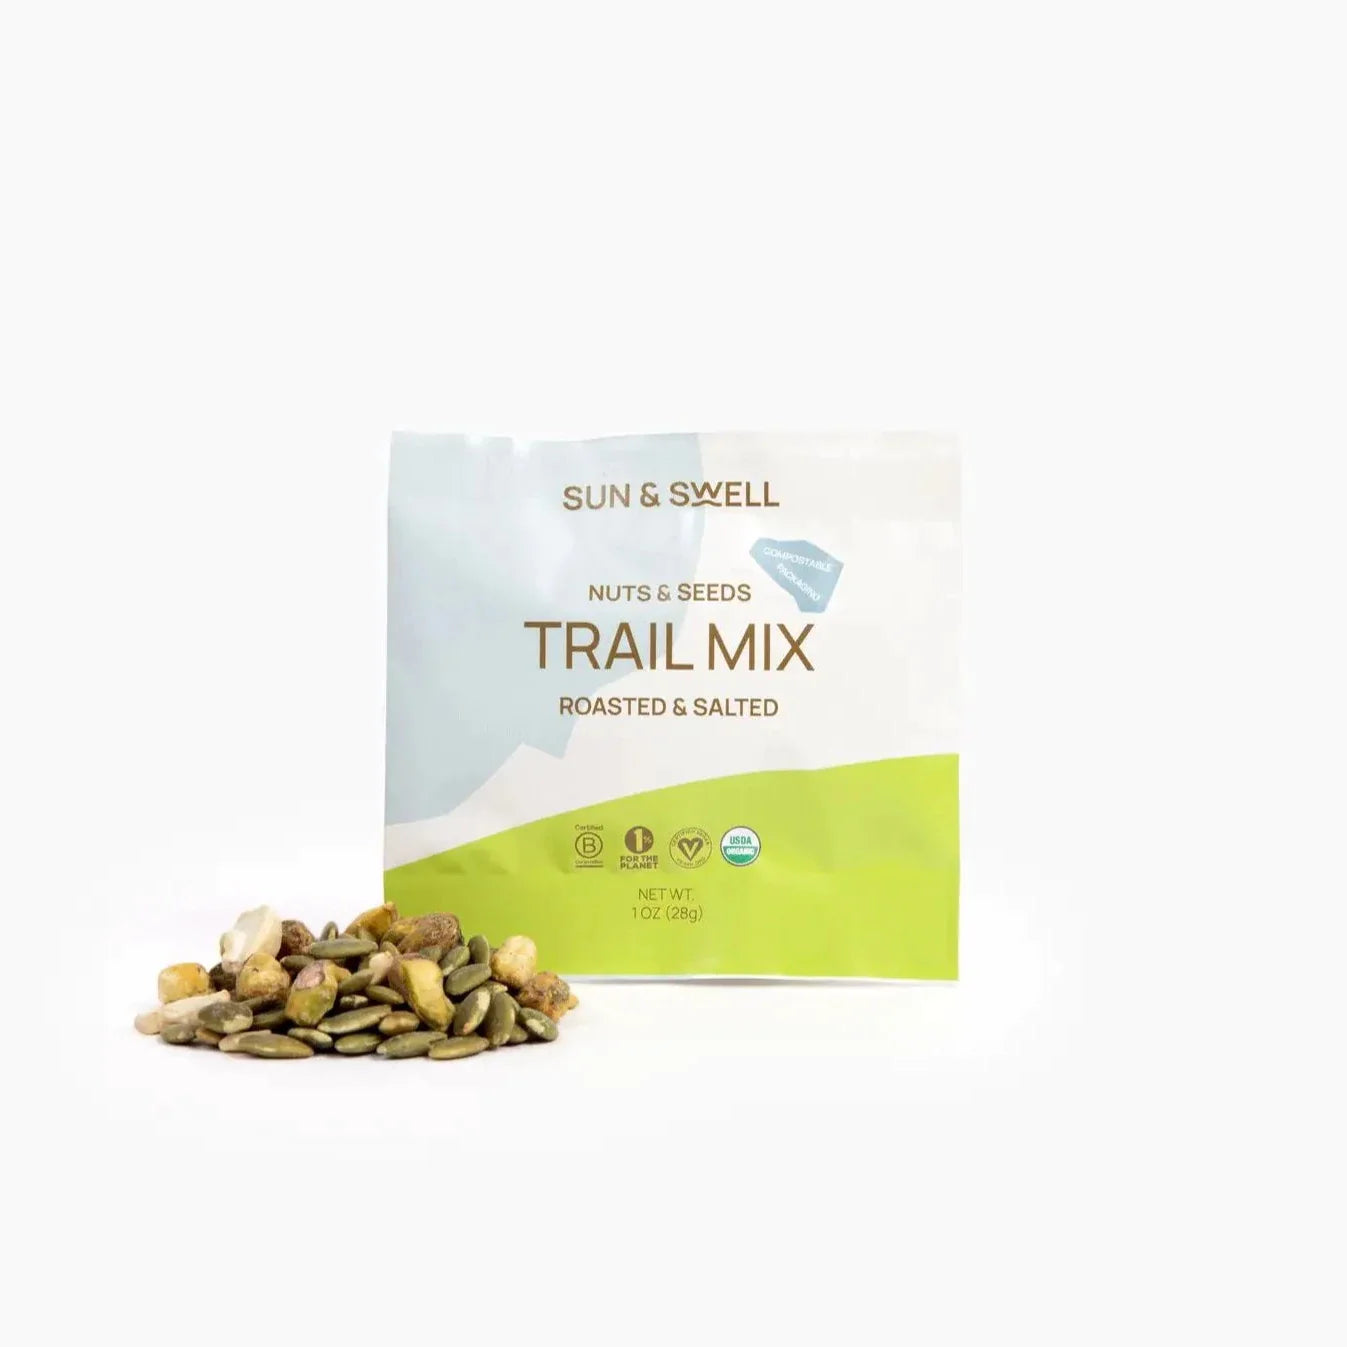 Trail mix and its compostable bag against a white background